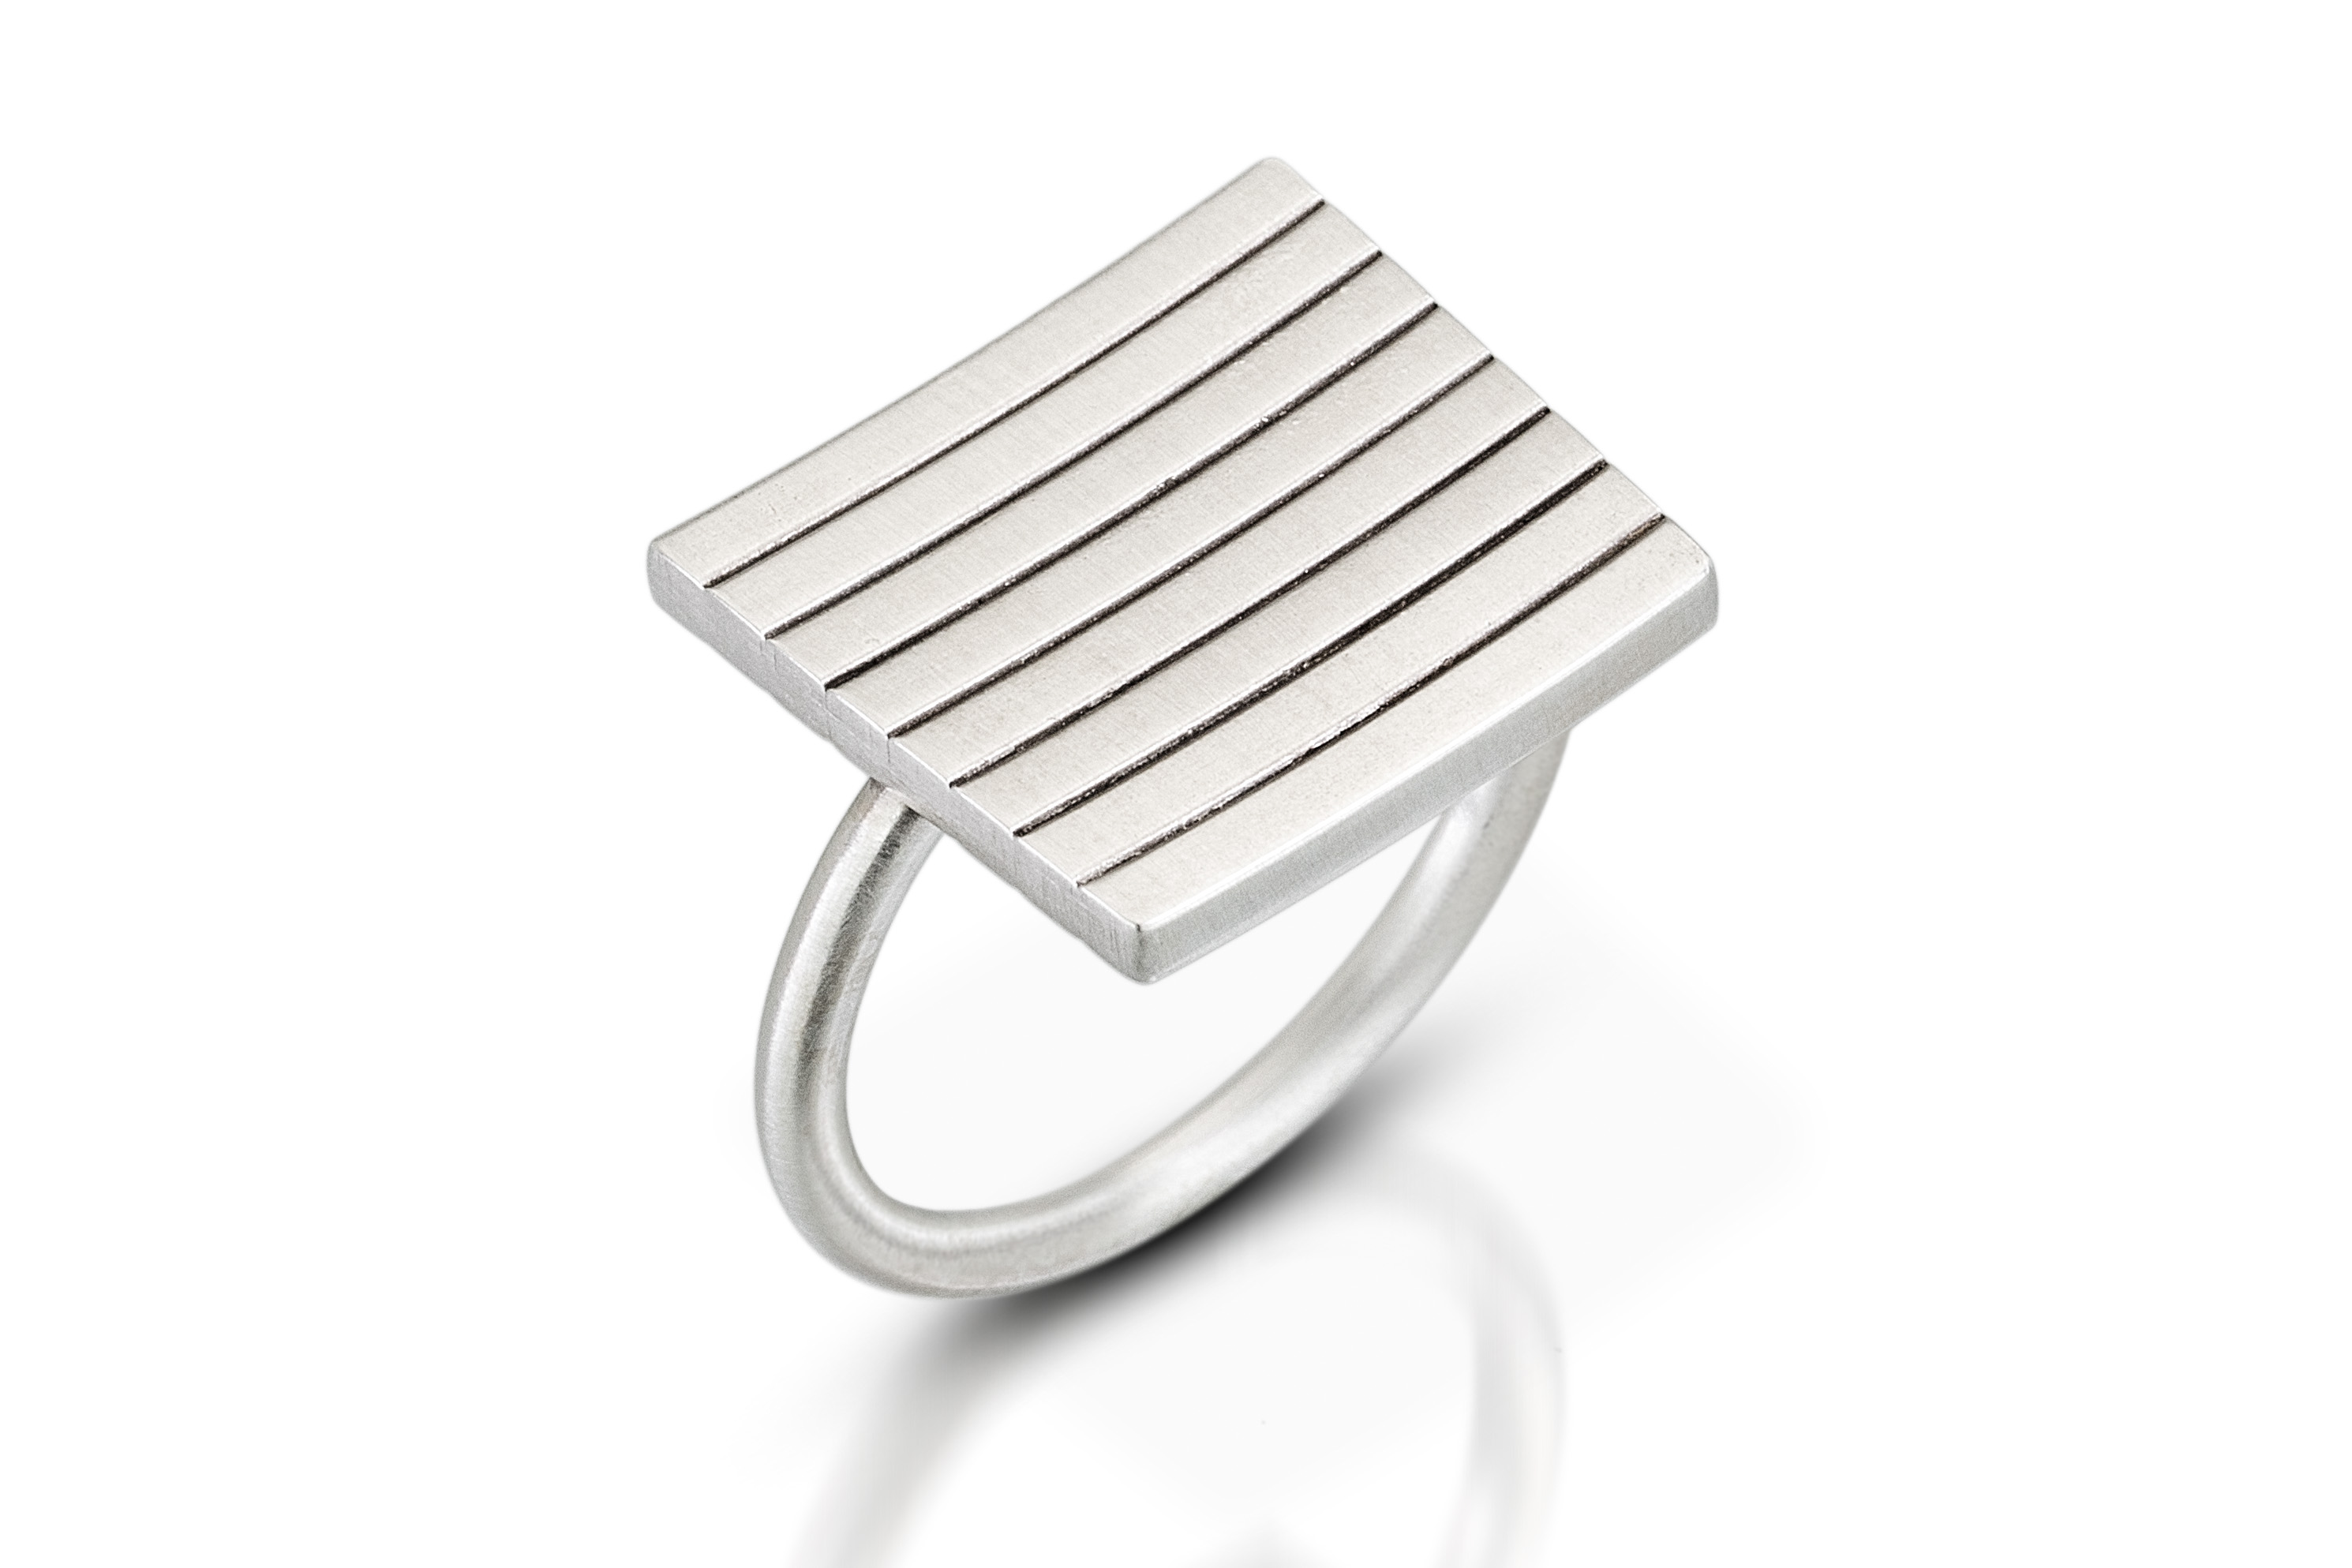 Stacked Ring - Emily Shaffer Studio $170 Photo Credit Cole Rodgers